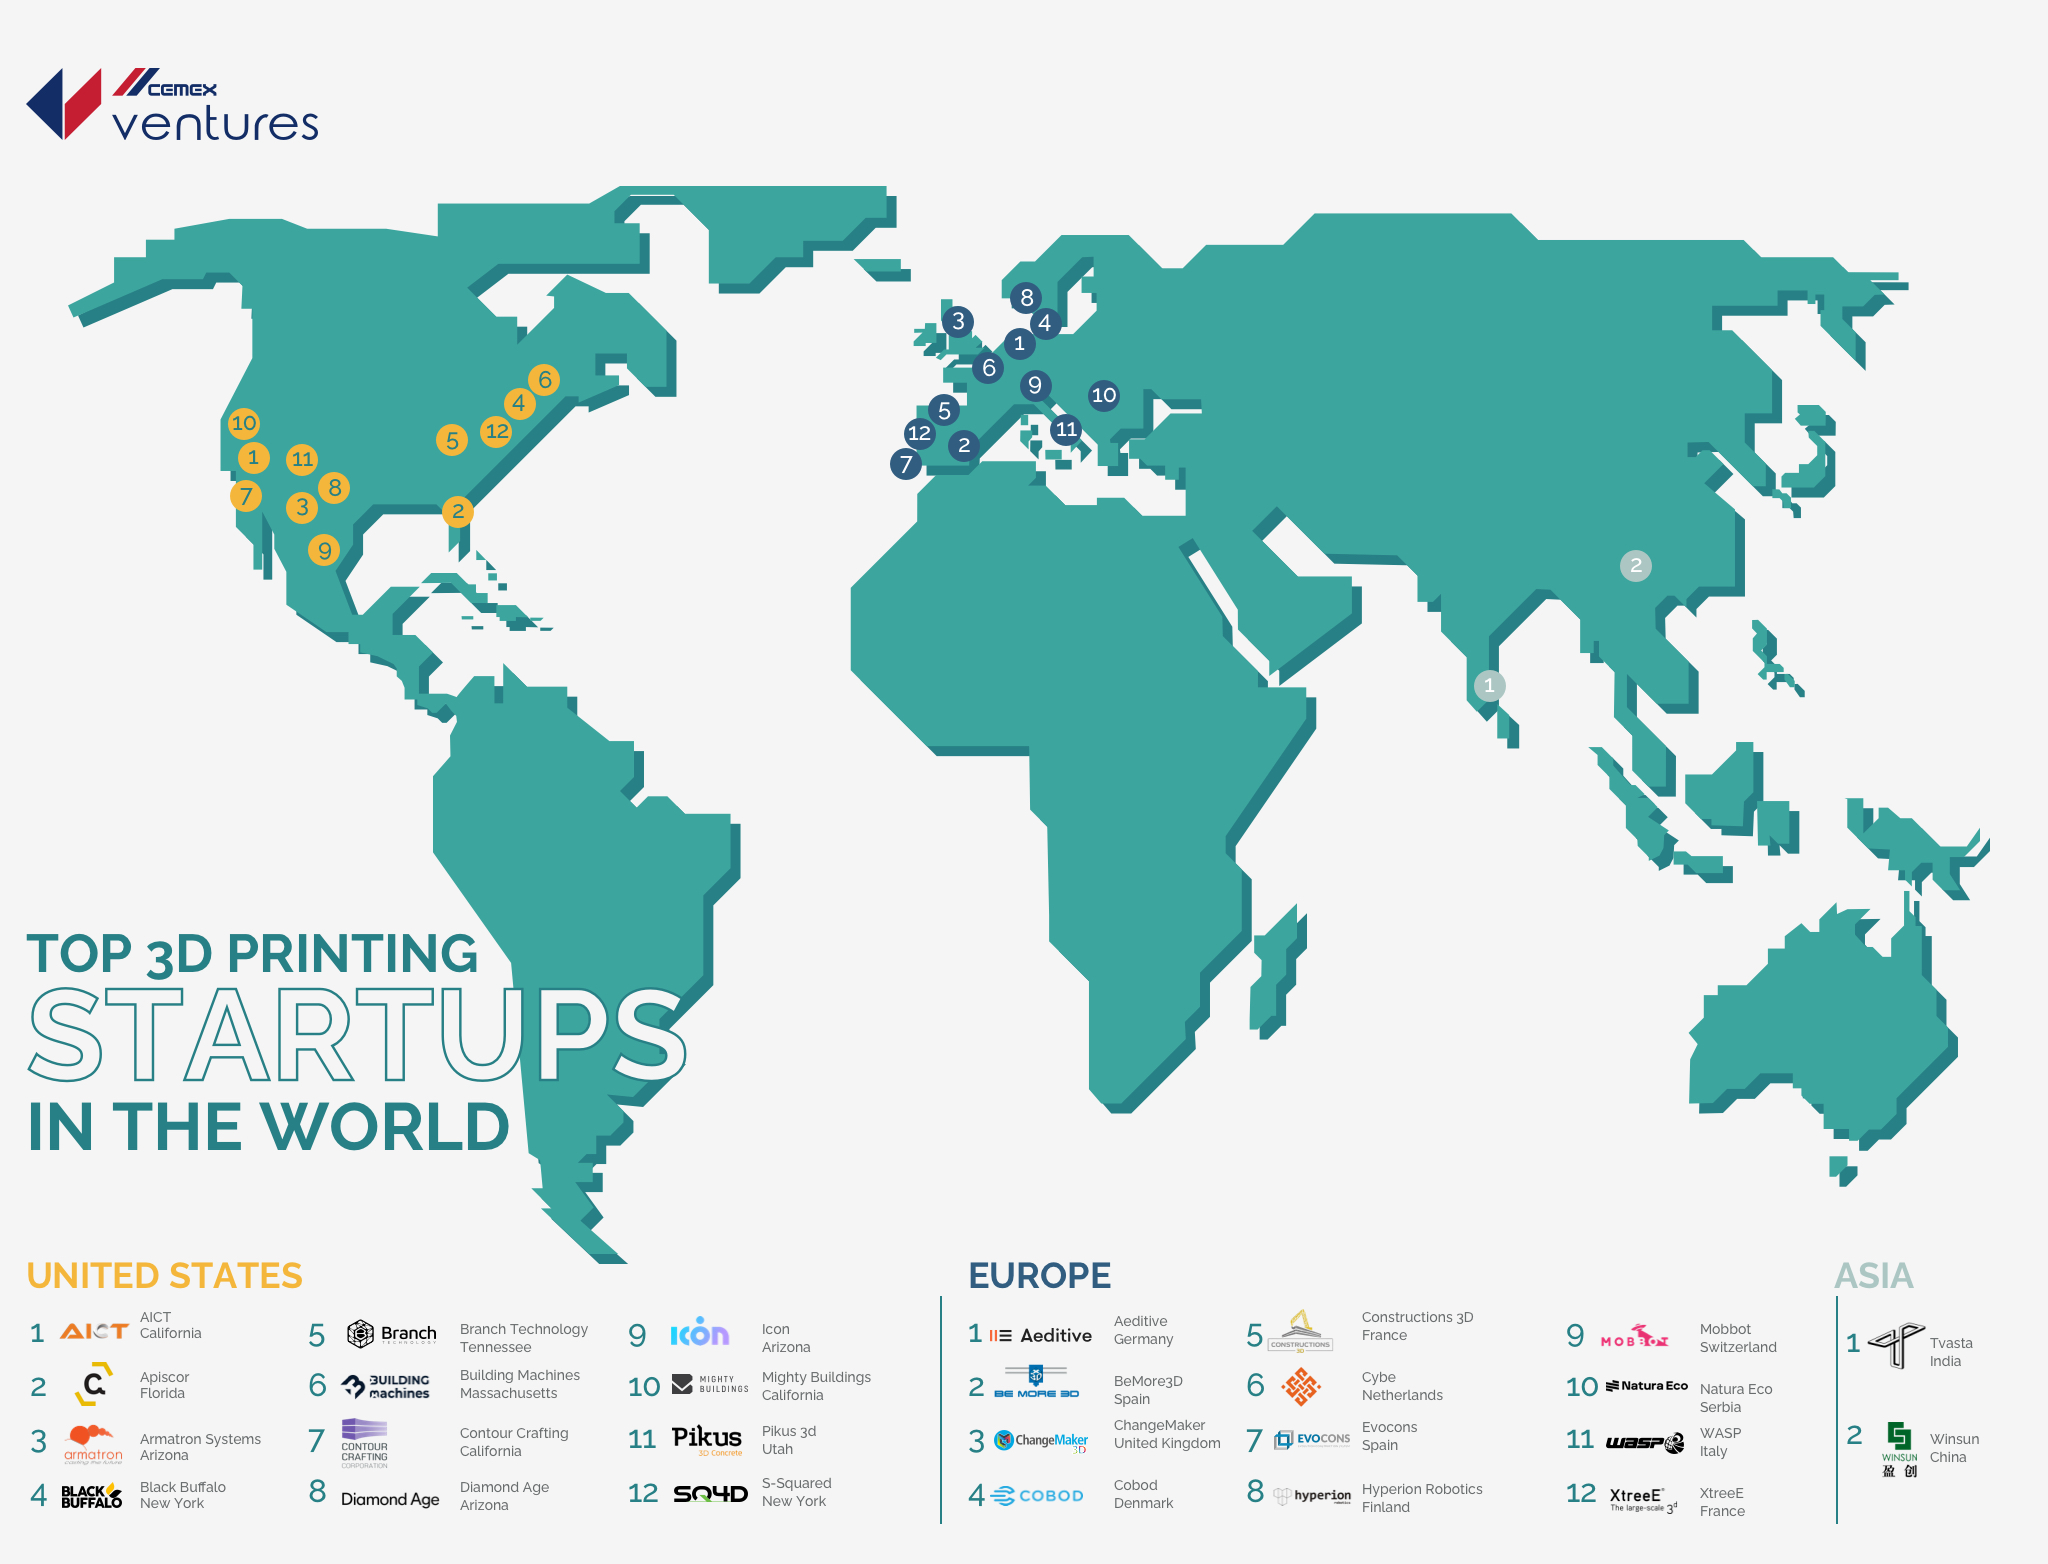 A map of the world showing startups